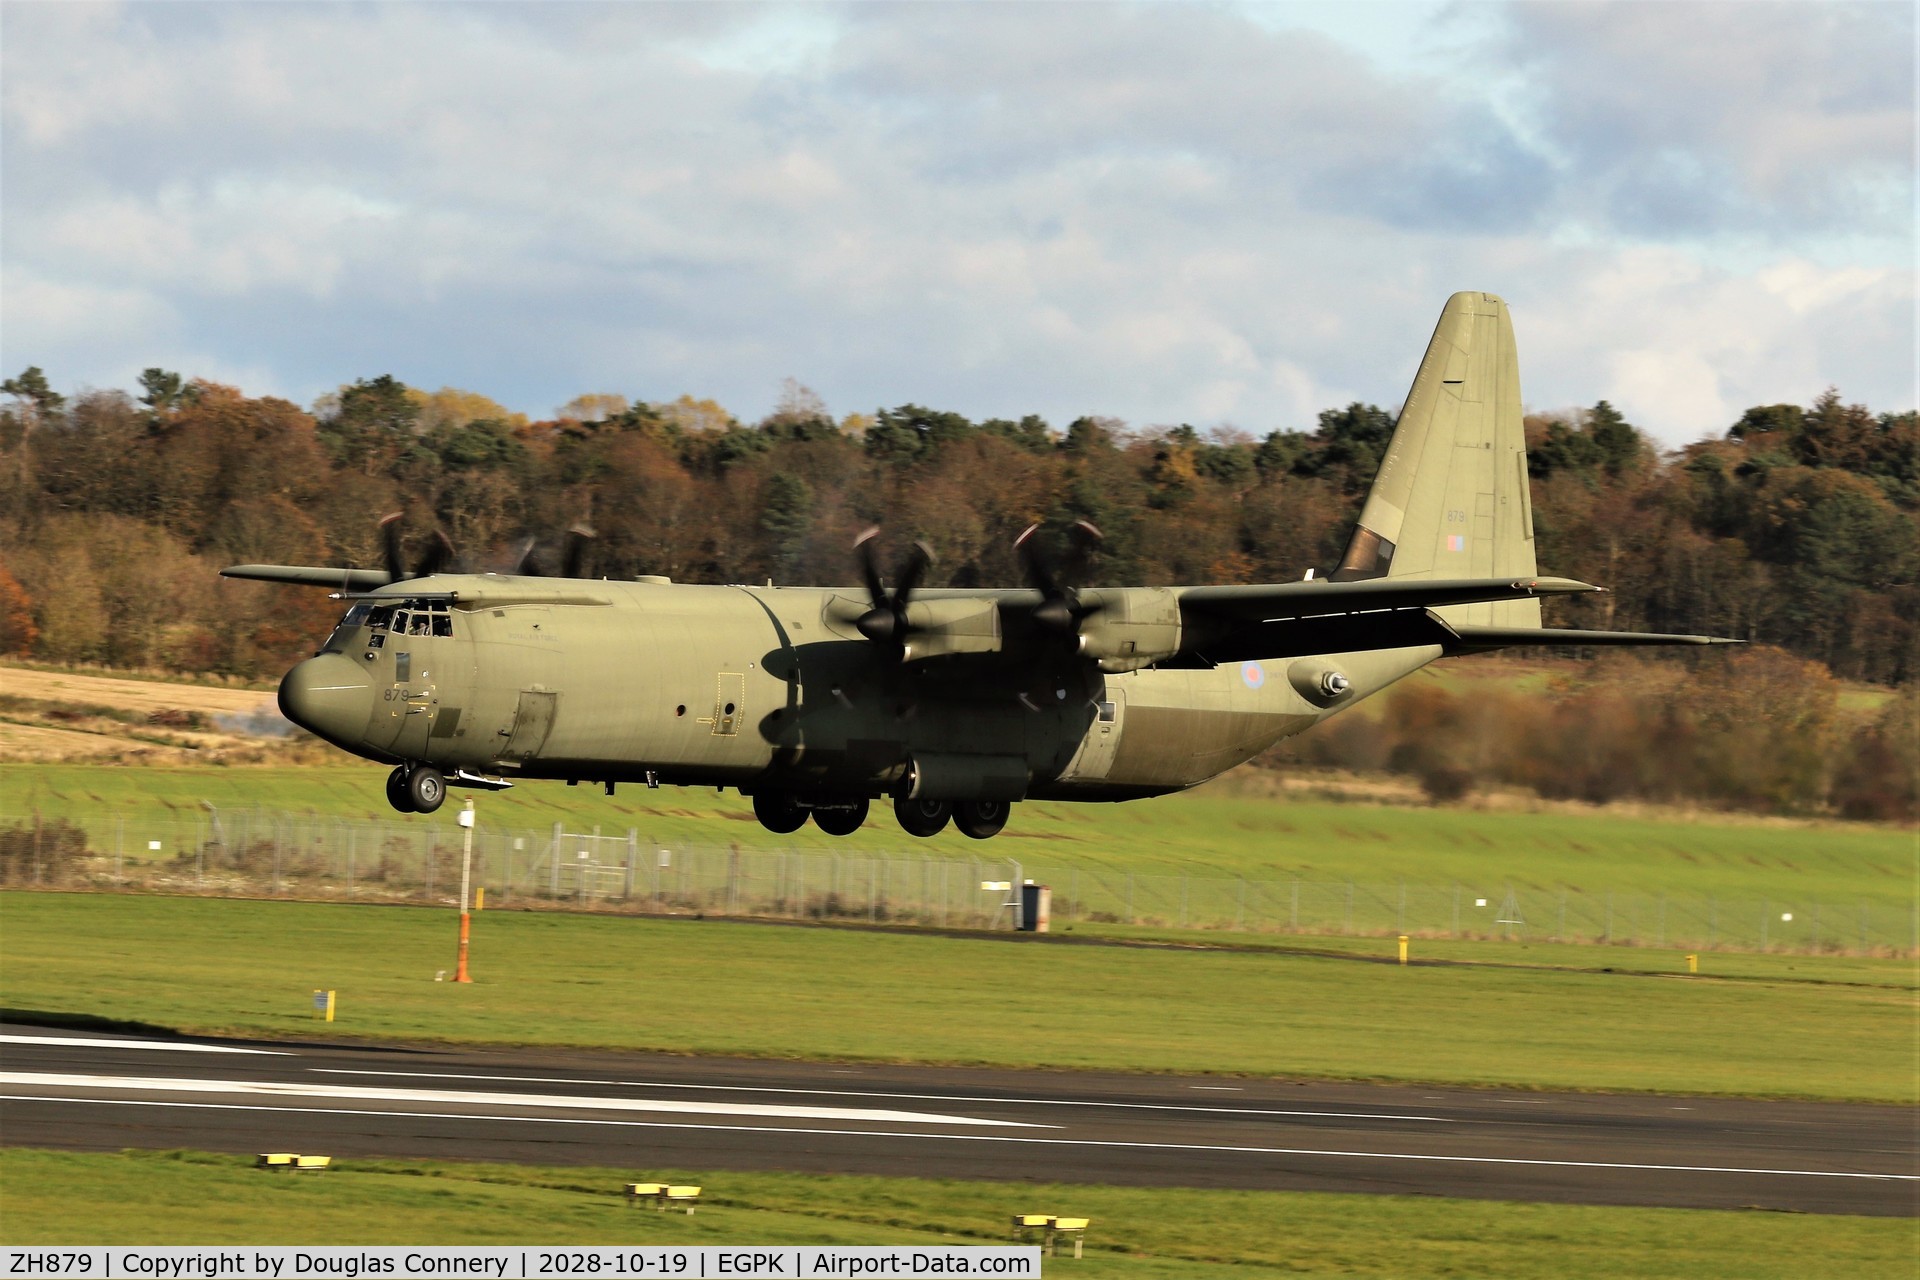 ZH879, 1998 Lockheed Martin C-130J-30 Hercules C.4 C/N 382-5463, This on TDY at Prestwick as part of Tartan Spirit excercise